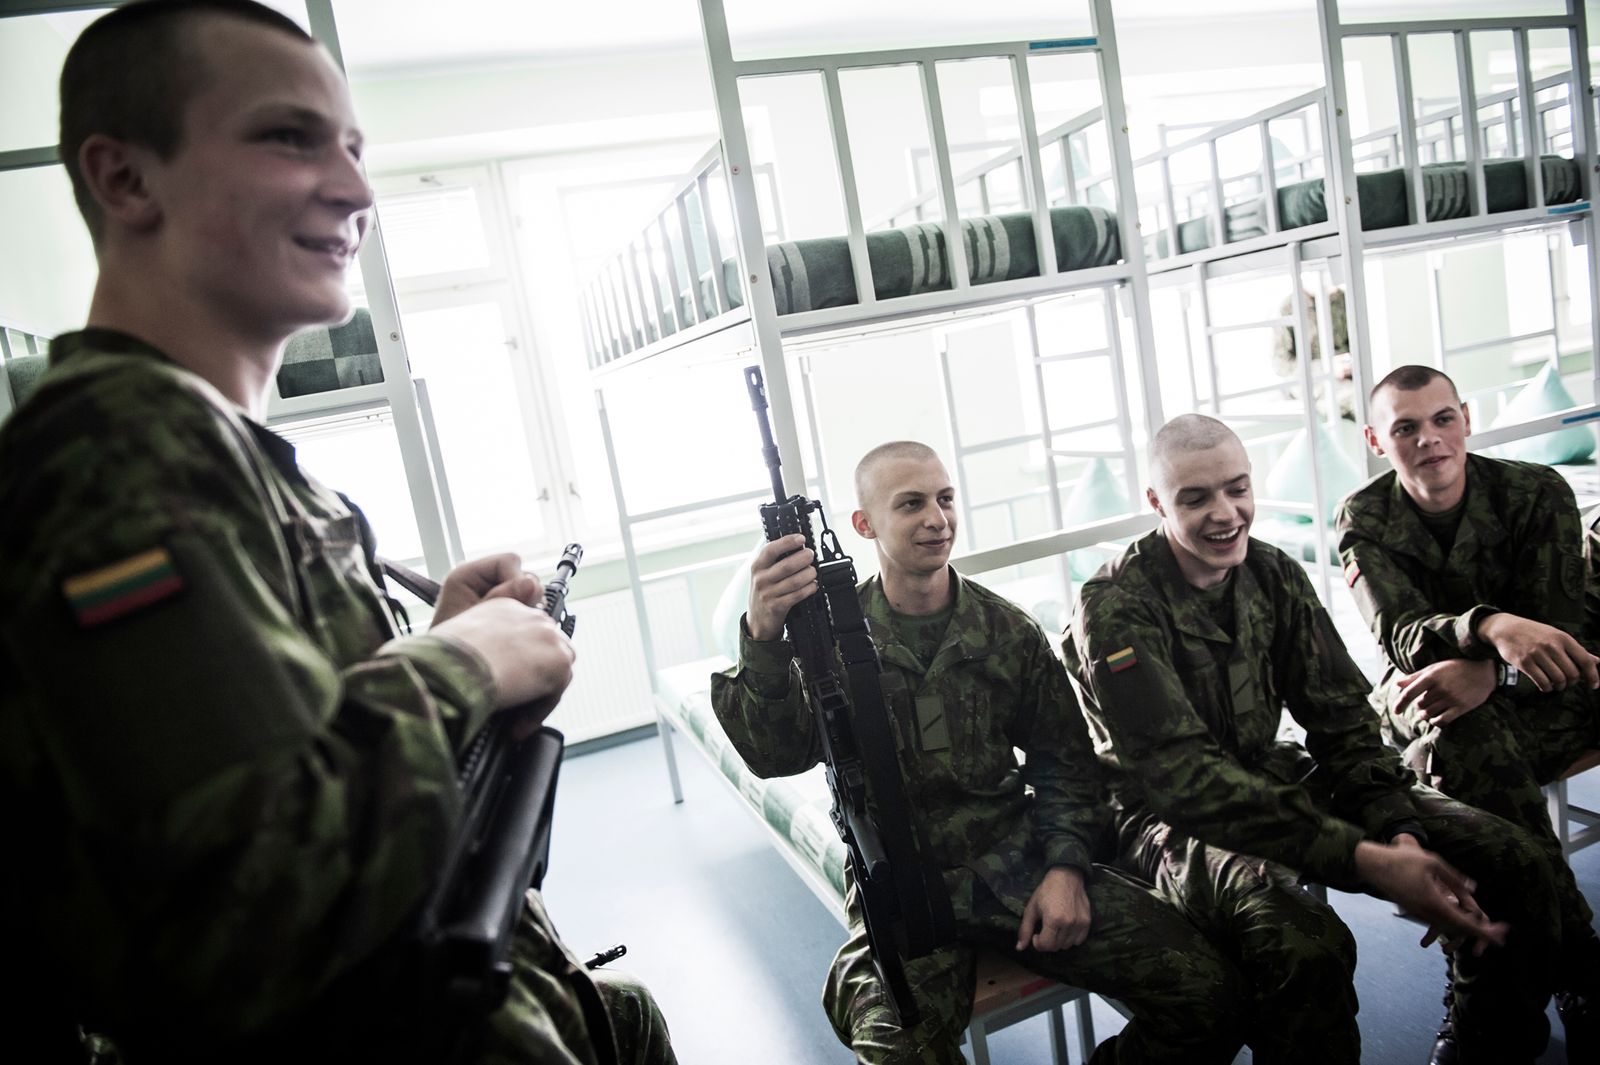 © Mattia Vacca - Cadets in their dormitory, inside their base in Klaipeda.